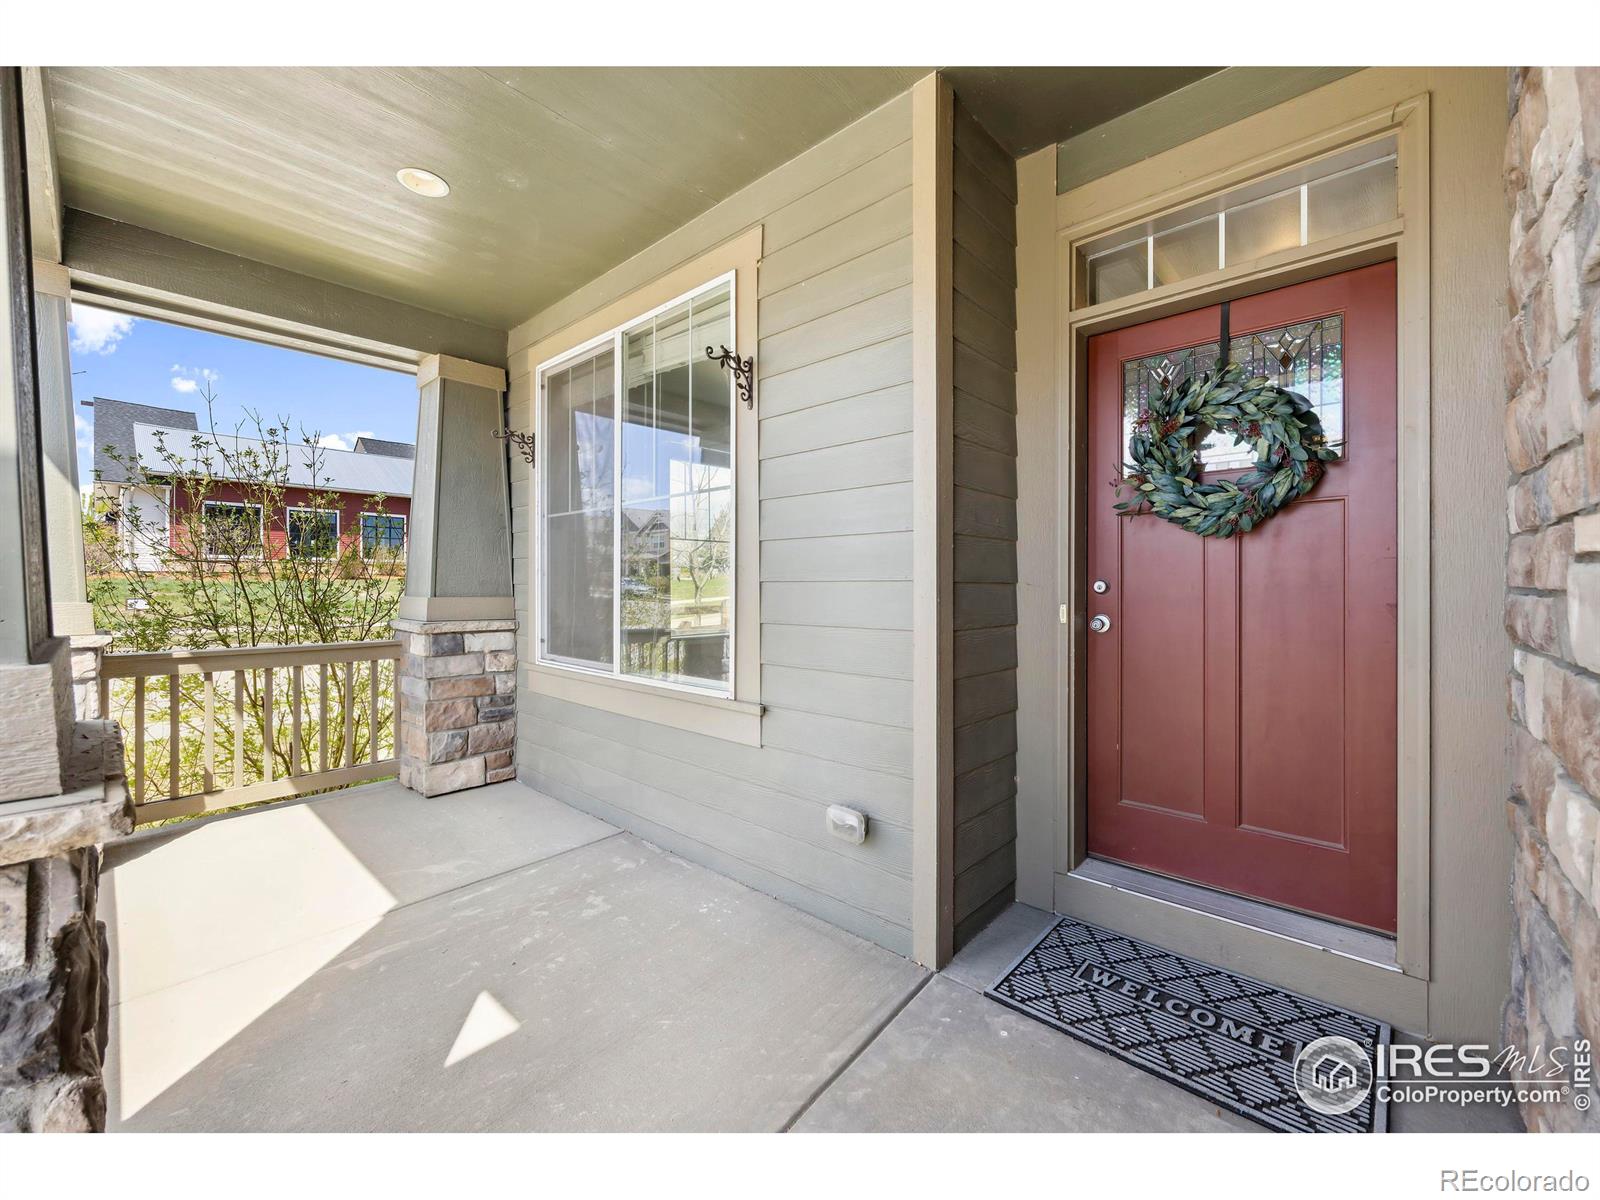 Report Image for 2148  Blackbird Drive,Fort Collins, Colorado